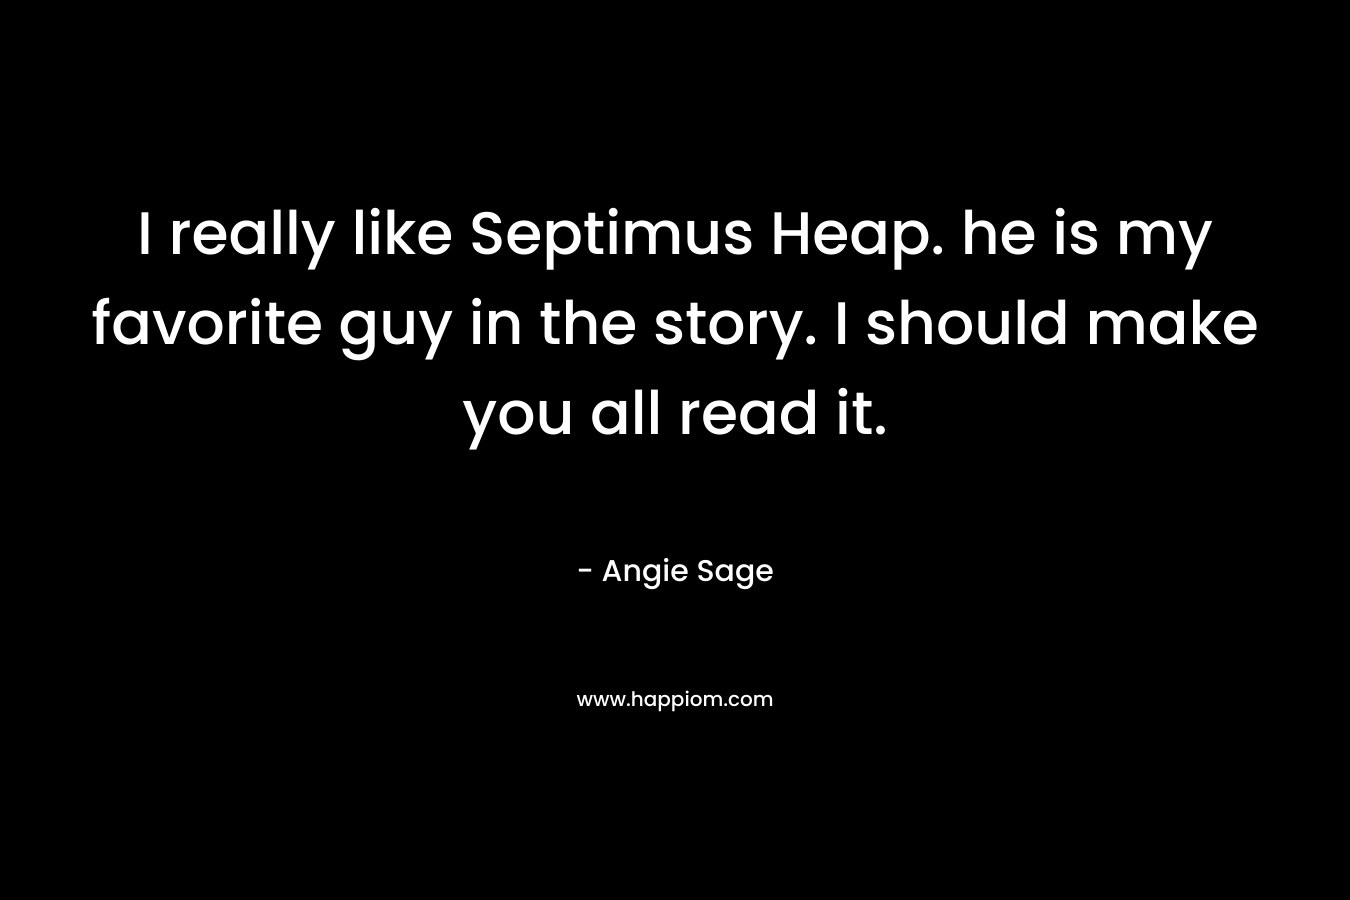 I really like Septimus Heap. he is my favorite guy in the story. I should make you all read it. – Angie Sage